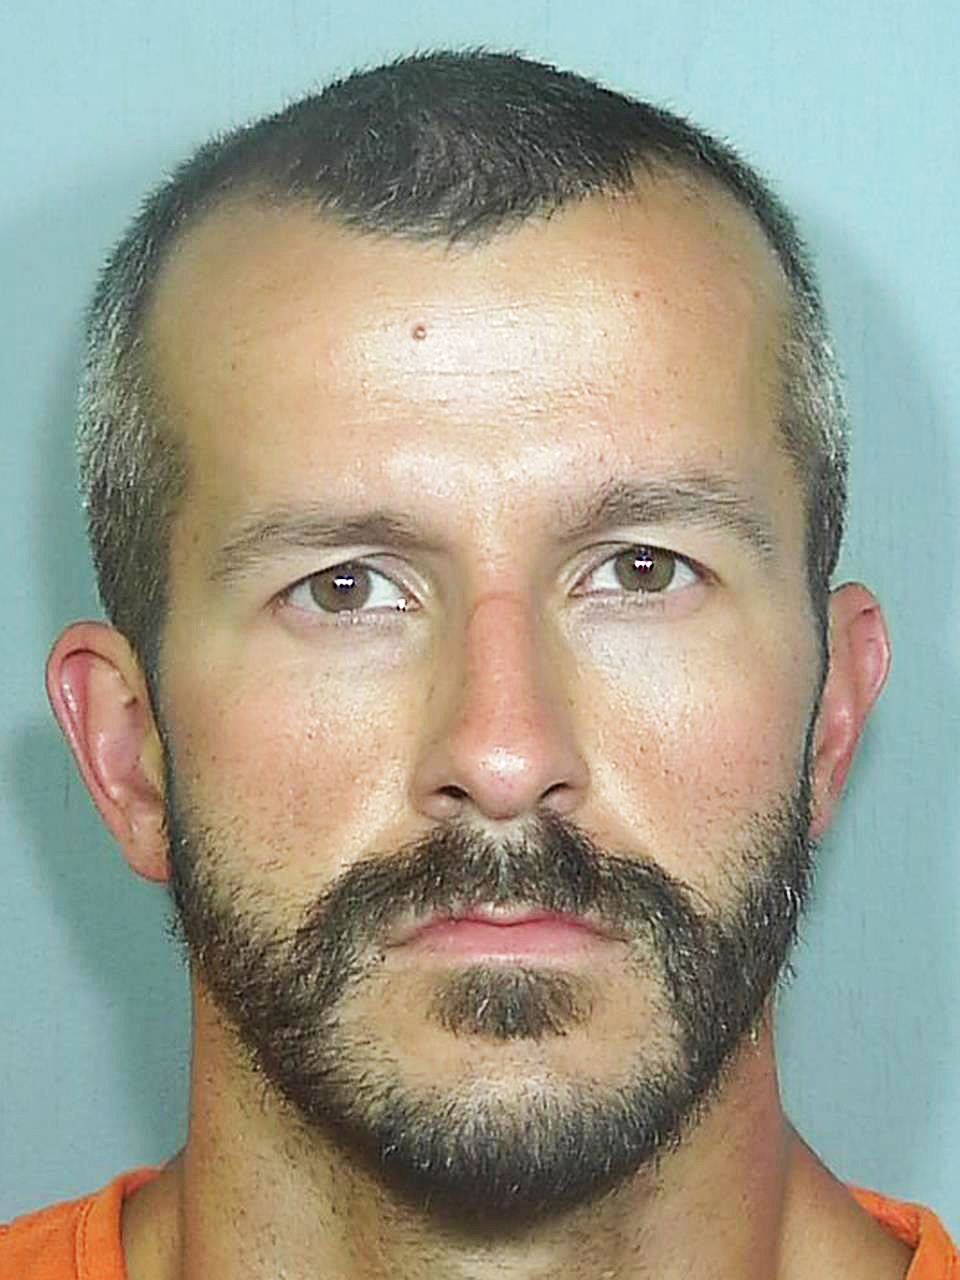 Chris Watts mugshots killed pregnant wife Shanann and is suspected of killing daughters Bella and Celeste